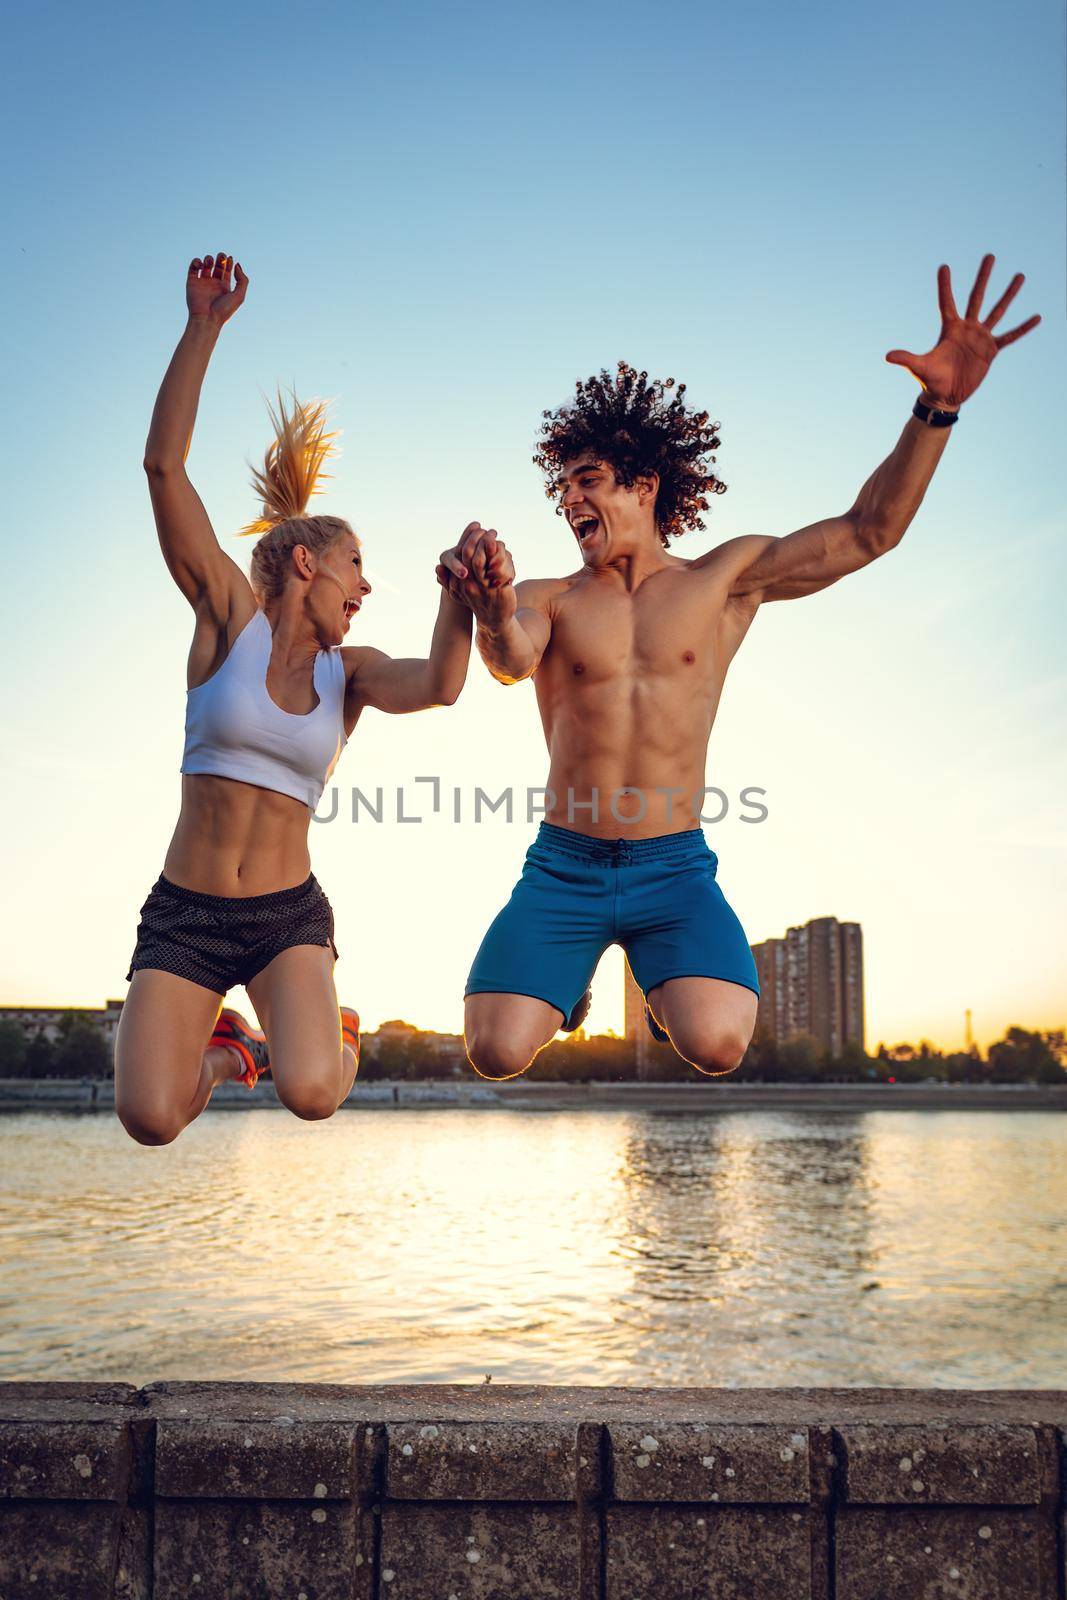 Beautiful young couple smiling and jumping after successful training by the river in the sunset.